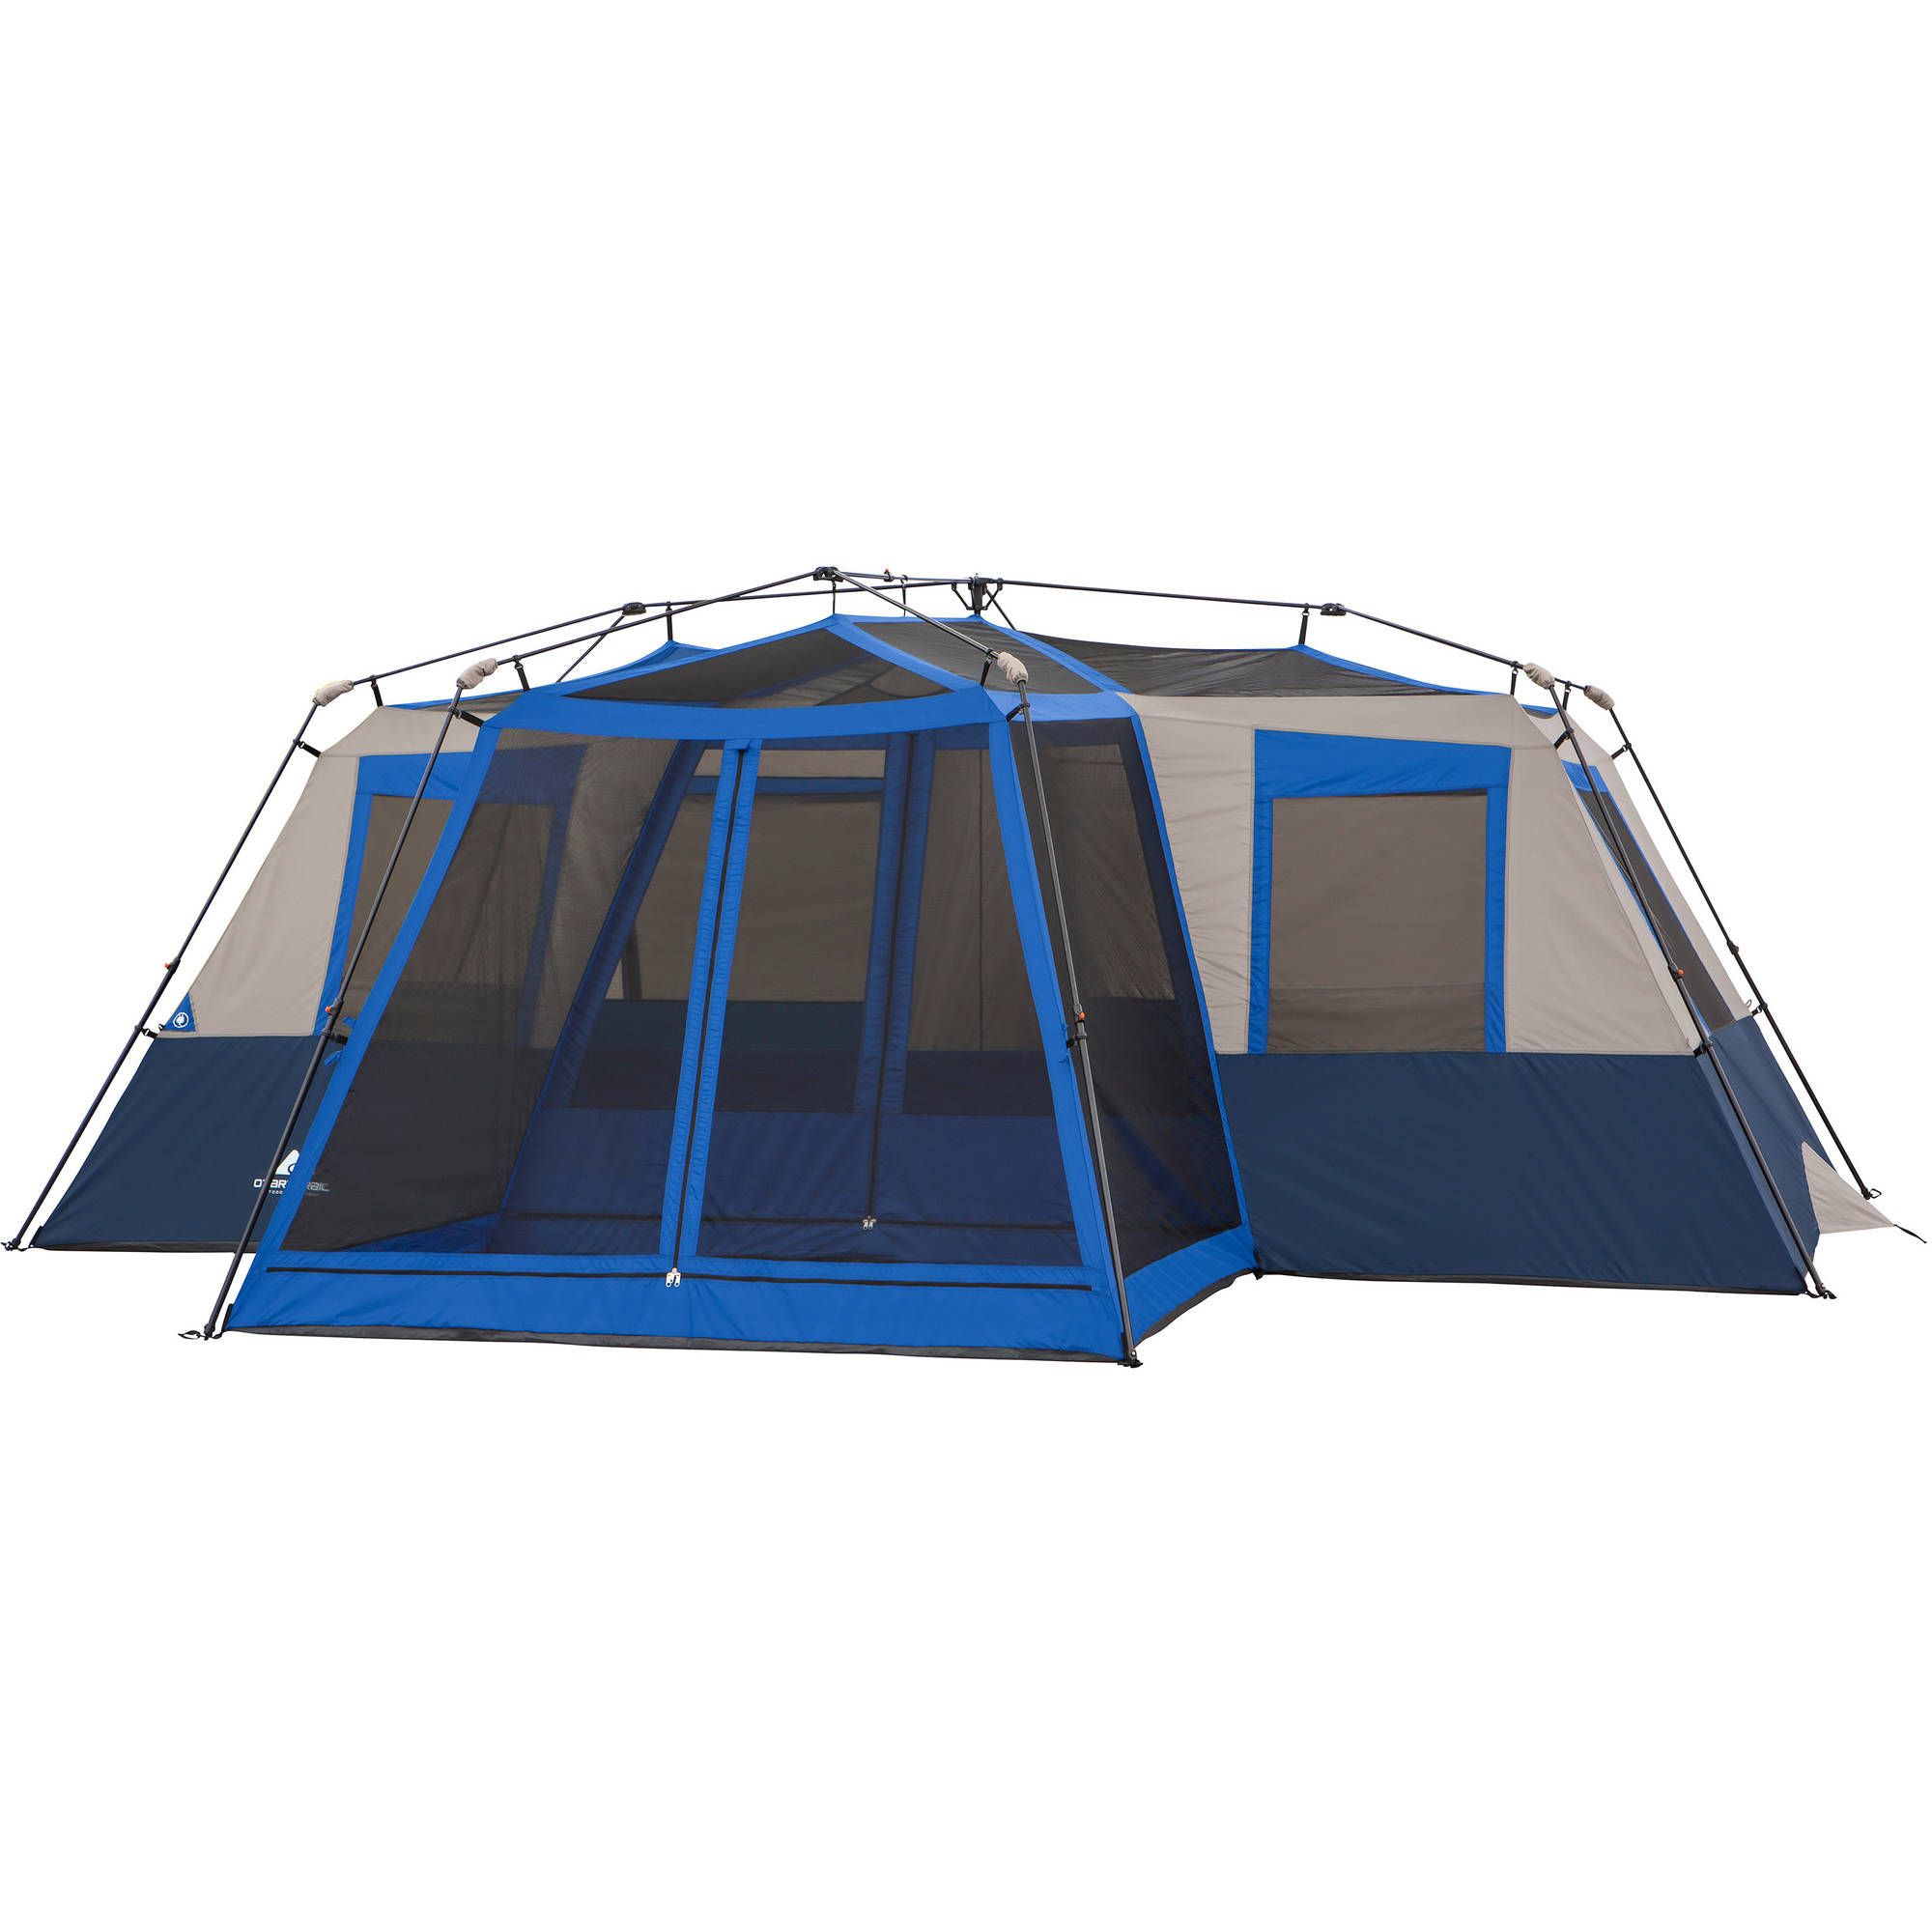 Ozark Trail 12 Person 2 Room Instant Cabin Tent with Screen Room - image 2 of 10